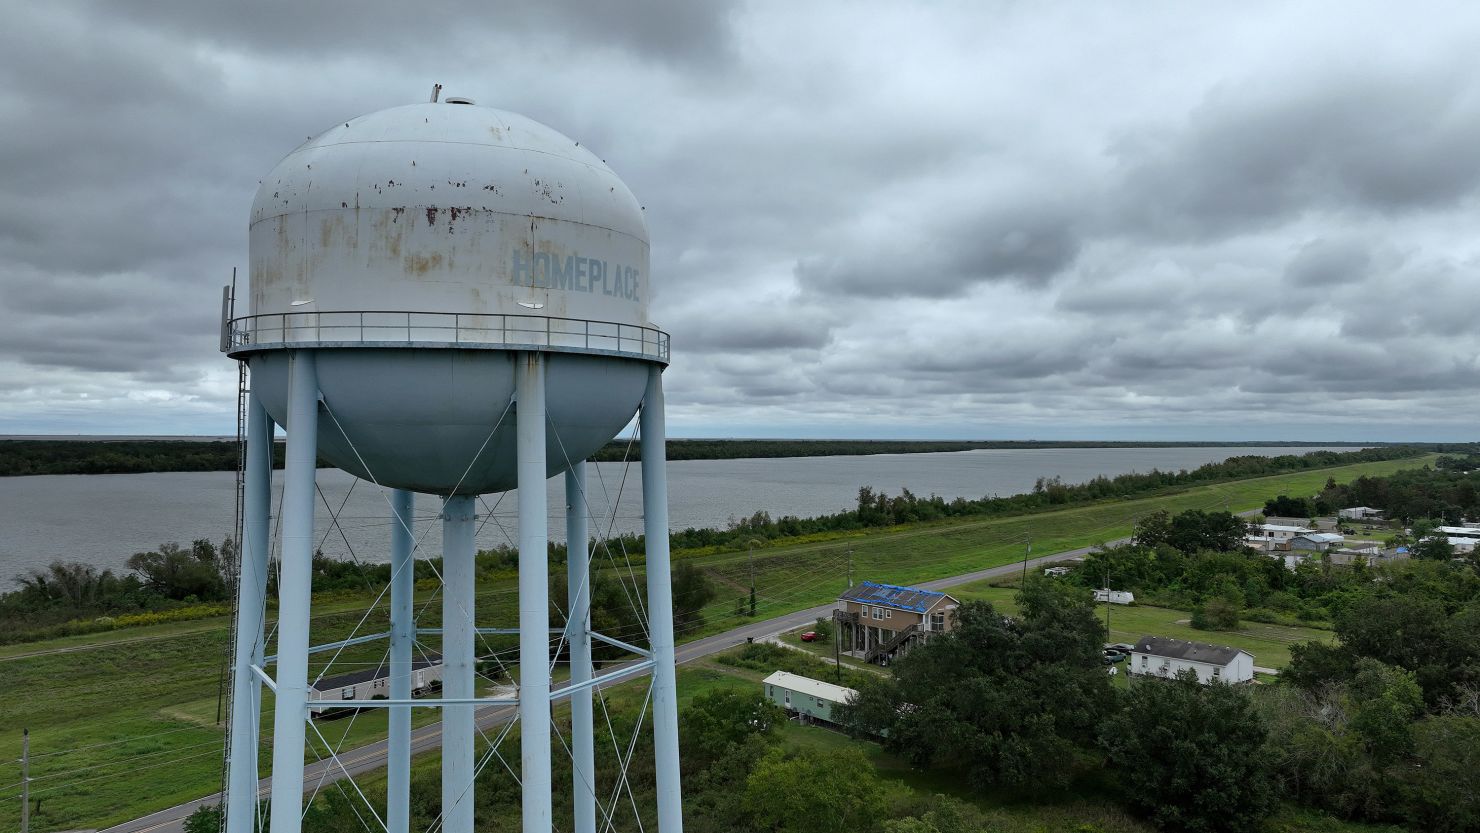 PORT SULPHUR, LOUISIANA - OCTOBER 12: In an aerial view, a water tower stands over homes along the banks of the Mississippi River on October 12, 2023 in Port Sulphur, Louisiana. As a saltwater intrusion from the Gulf of Mexico continues to push its way up the drought-stricken Mississippi River towards New Orleans, the U.S. Army Corps of Engineers are using pipes to move dredged silt to fortify an underwater sill along the bottom of the Mississippi River that should slow the movement of the saltwater wedge. The U.S. Army Corps of Engineers started barging fresh water to water treatment facilities in Plaquemines Parish to help dilute the salinity content to levels safe for water treatment. If the saltwater intrusion isn't slowed it could find its way upriver to the New Orleans area by the end of October, threatening fresh drinking water for residents. (Photo by Justin Sullivan/Getty Images)